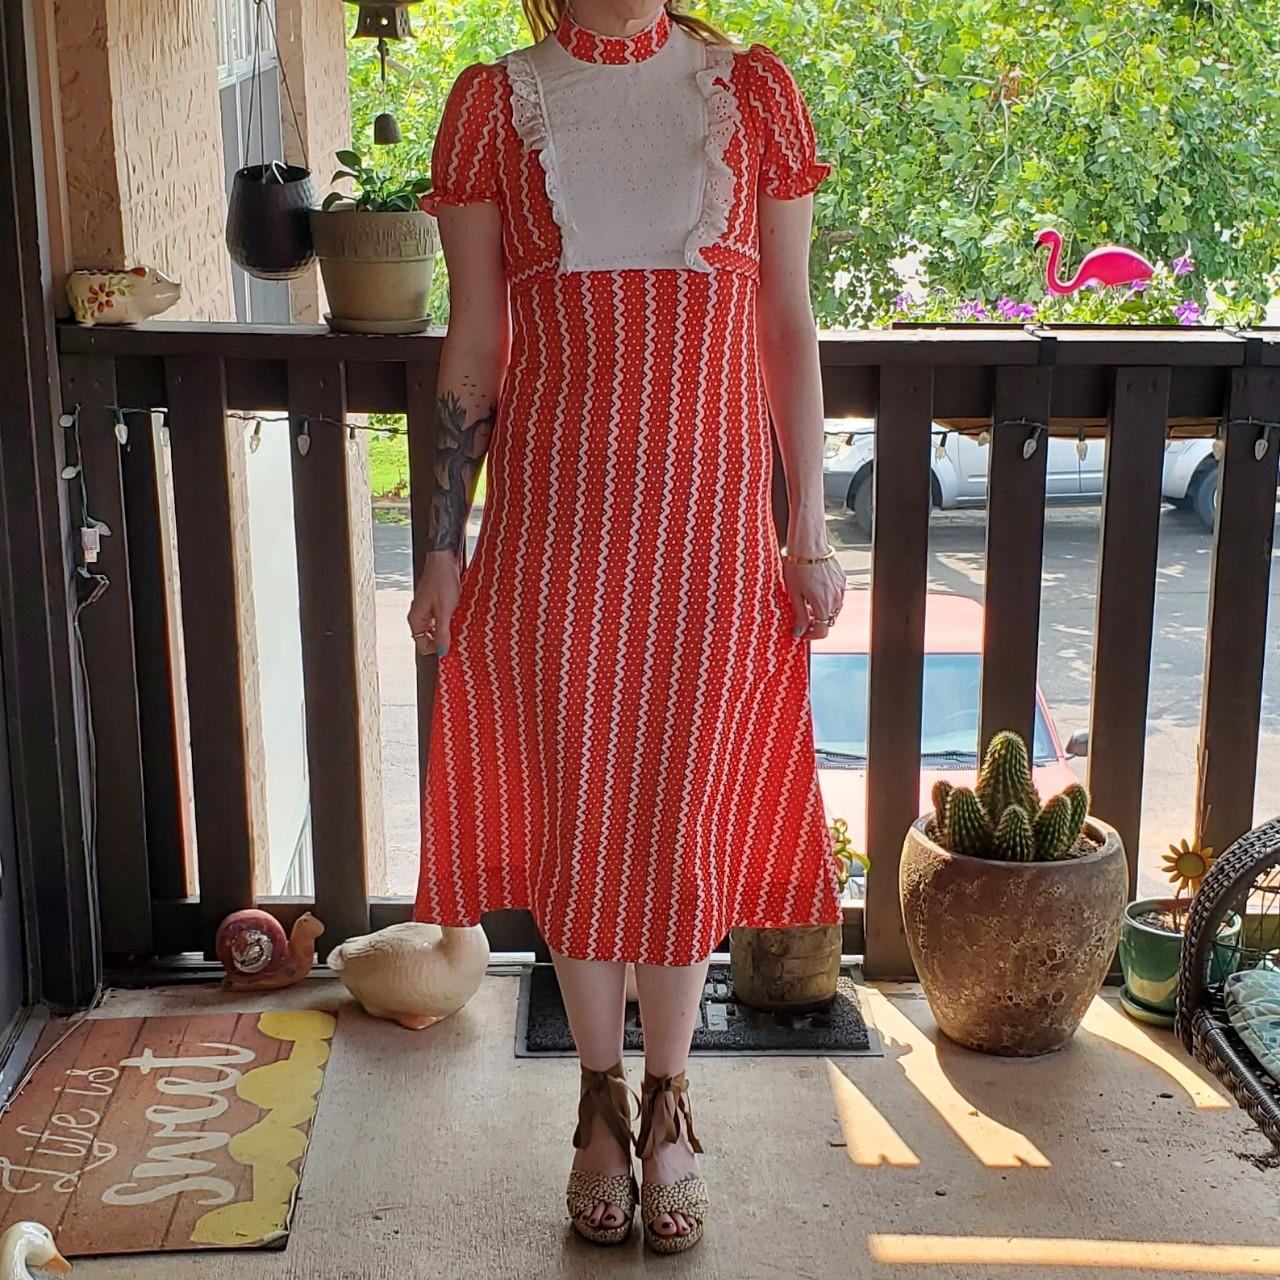 American Vintage Women's Red and White Dress (2)